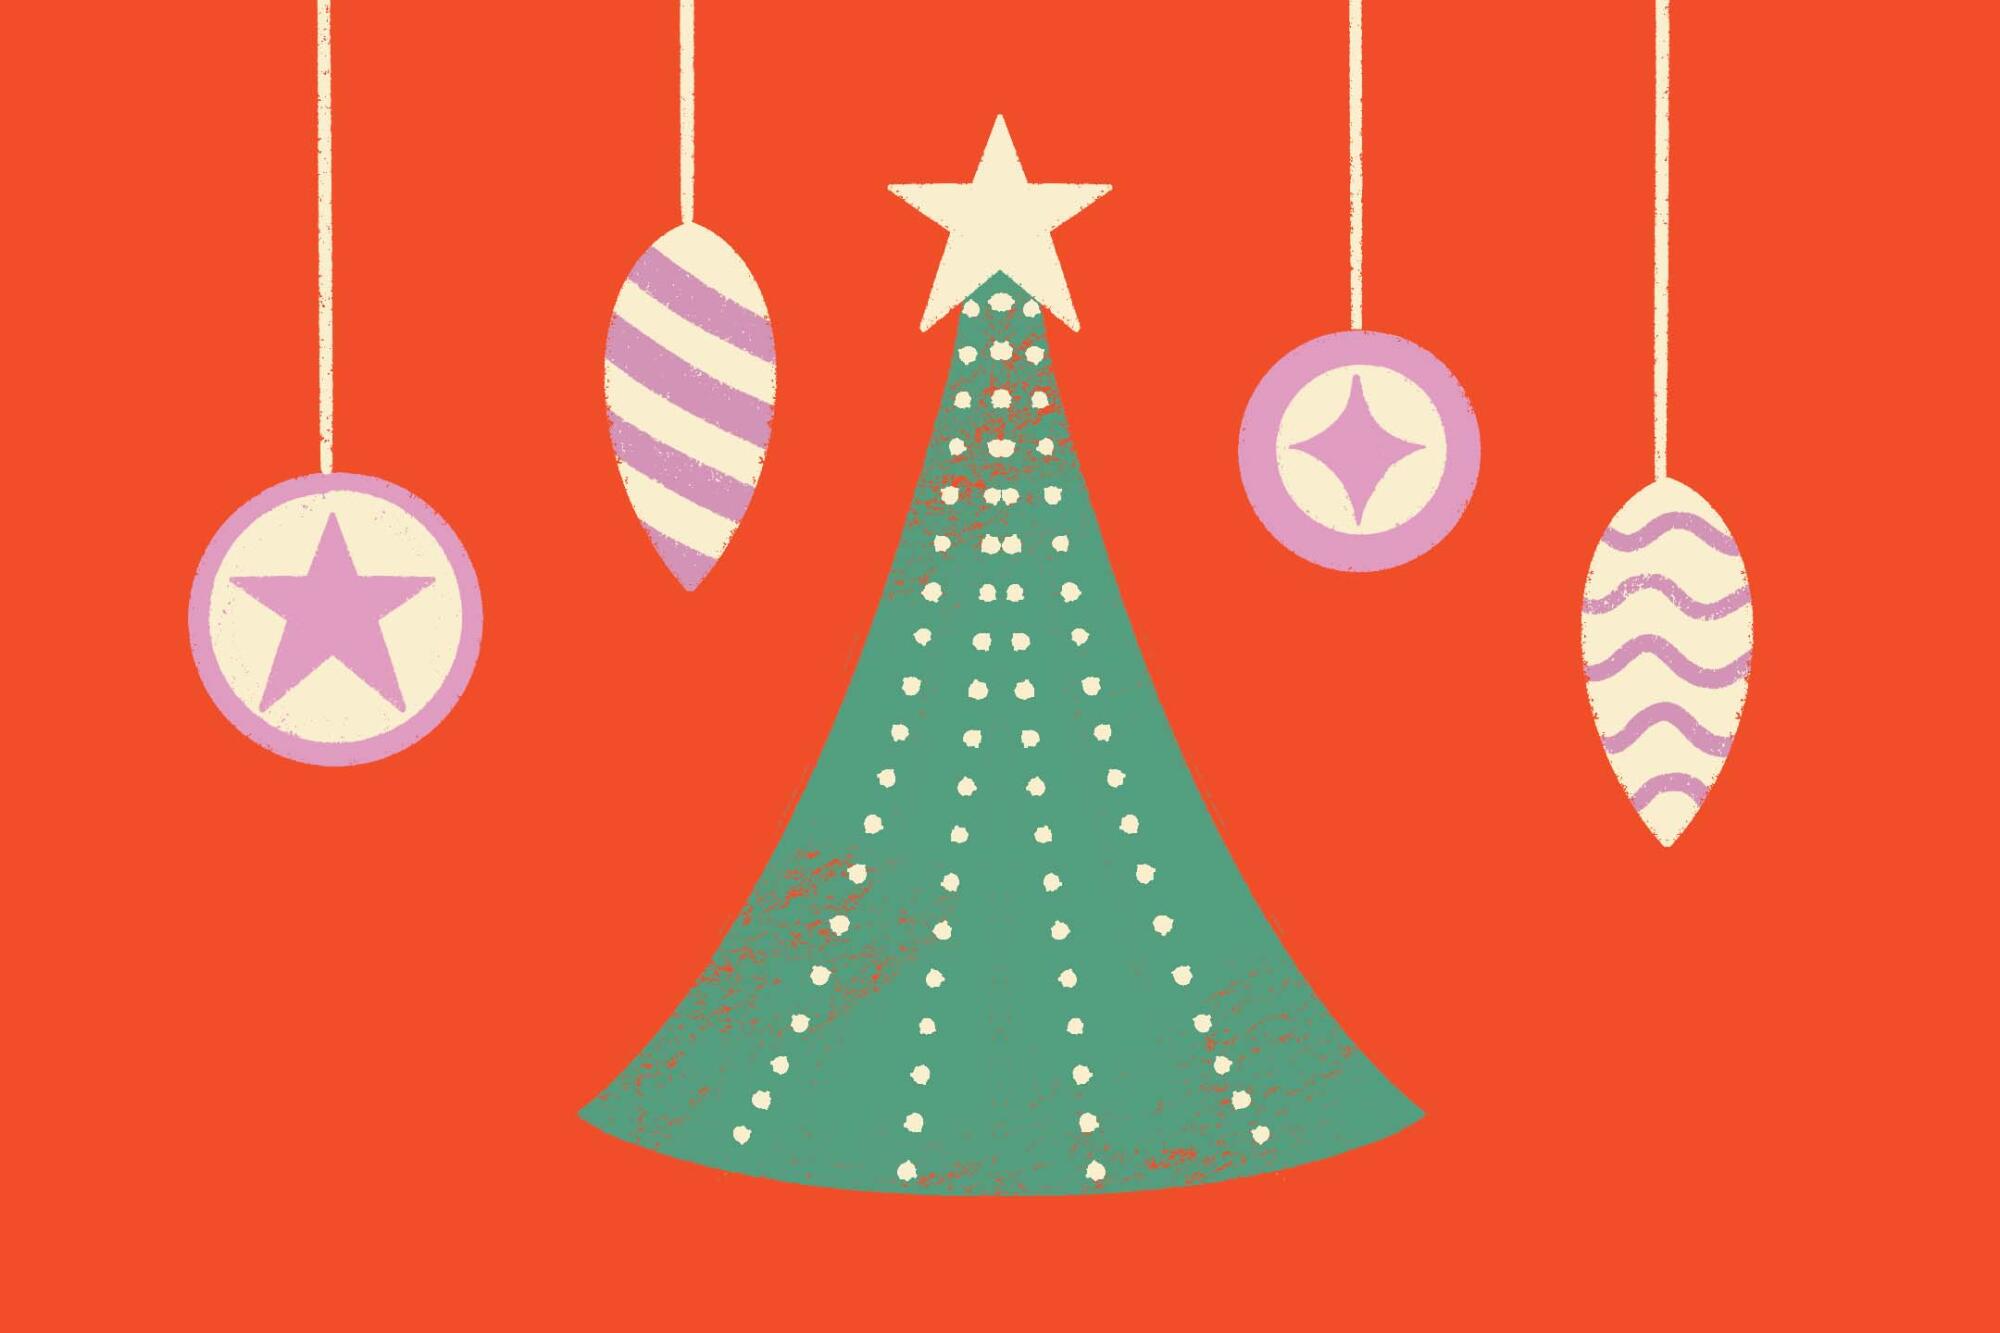 Illustration of a Christmas tree with ornaments hanging on either side